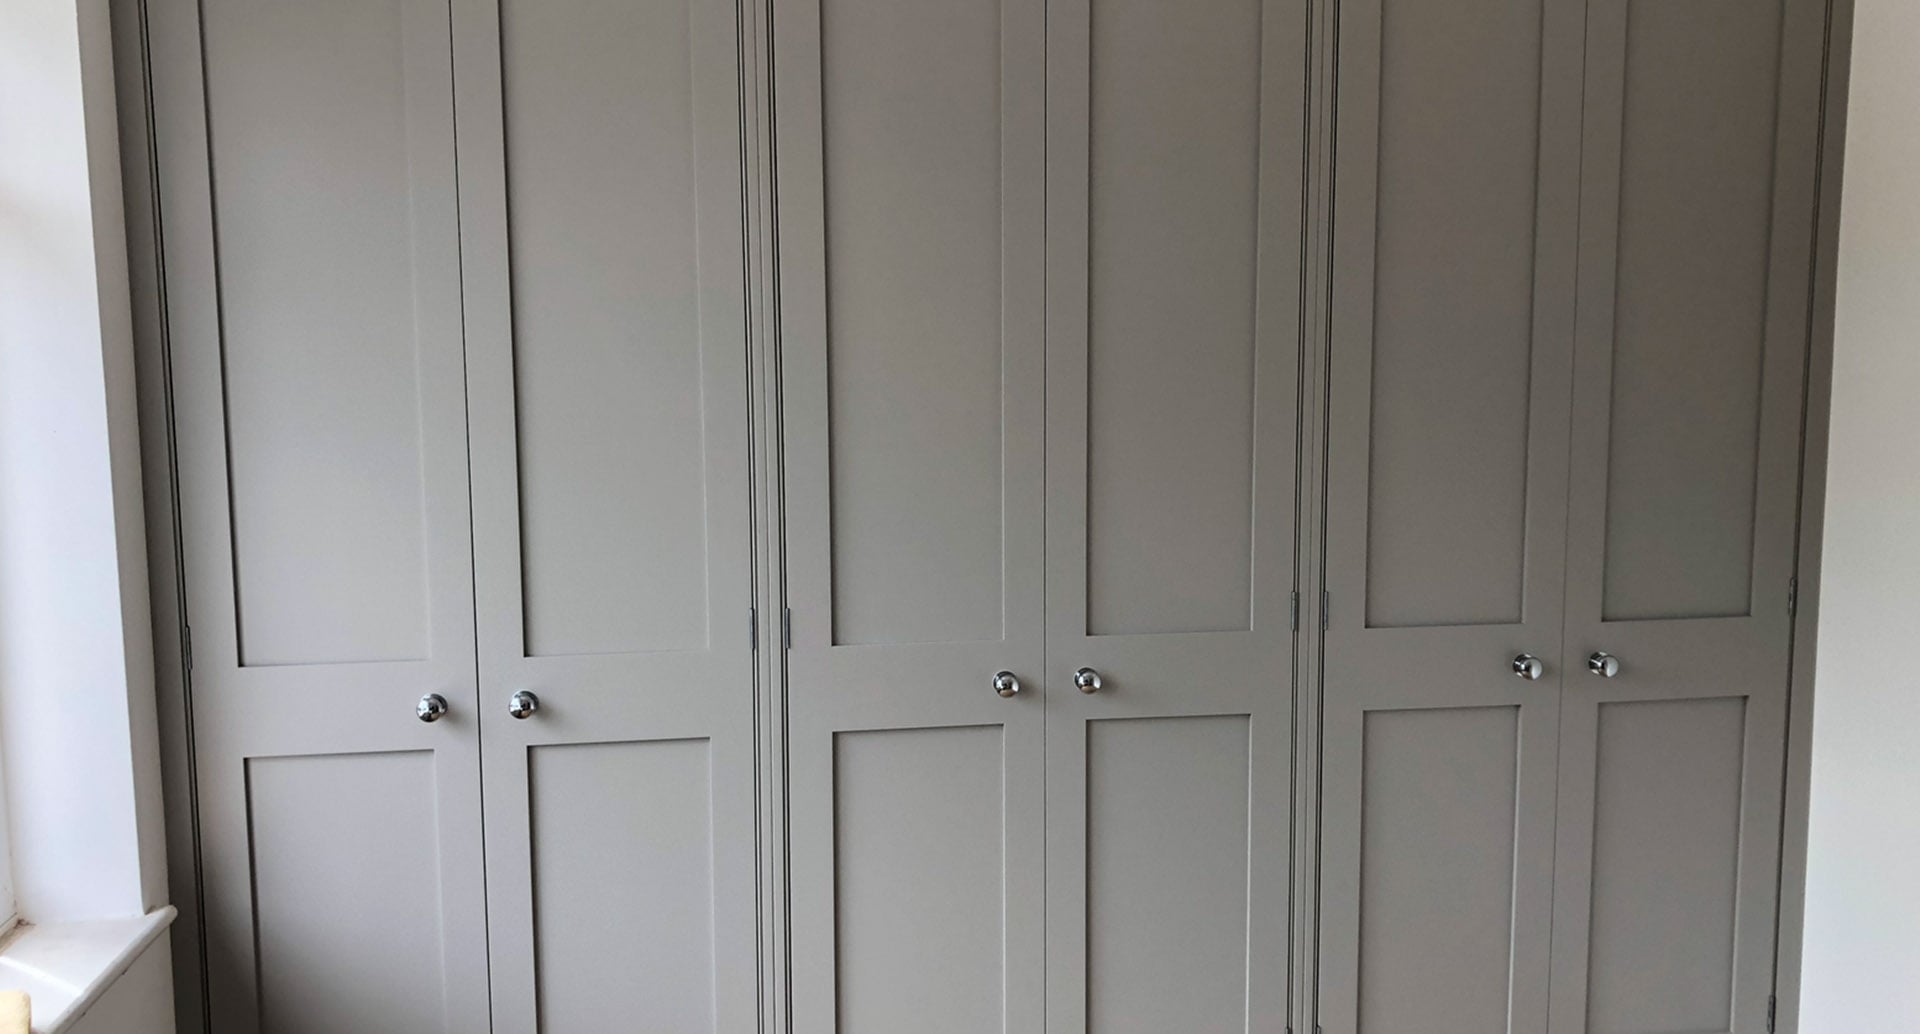 The front of some bespoke fitted wardrobes.